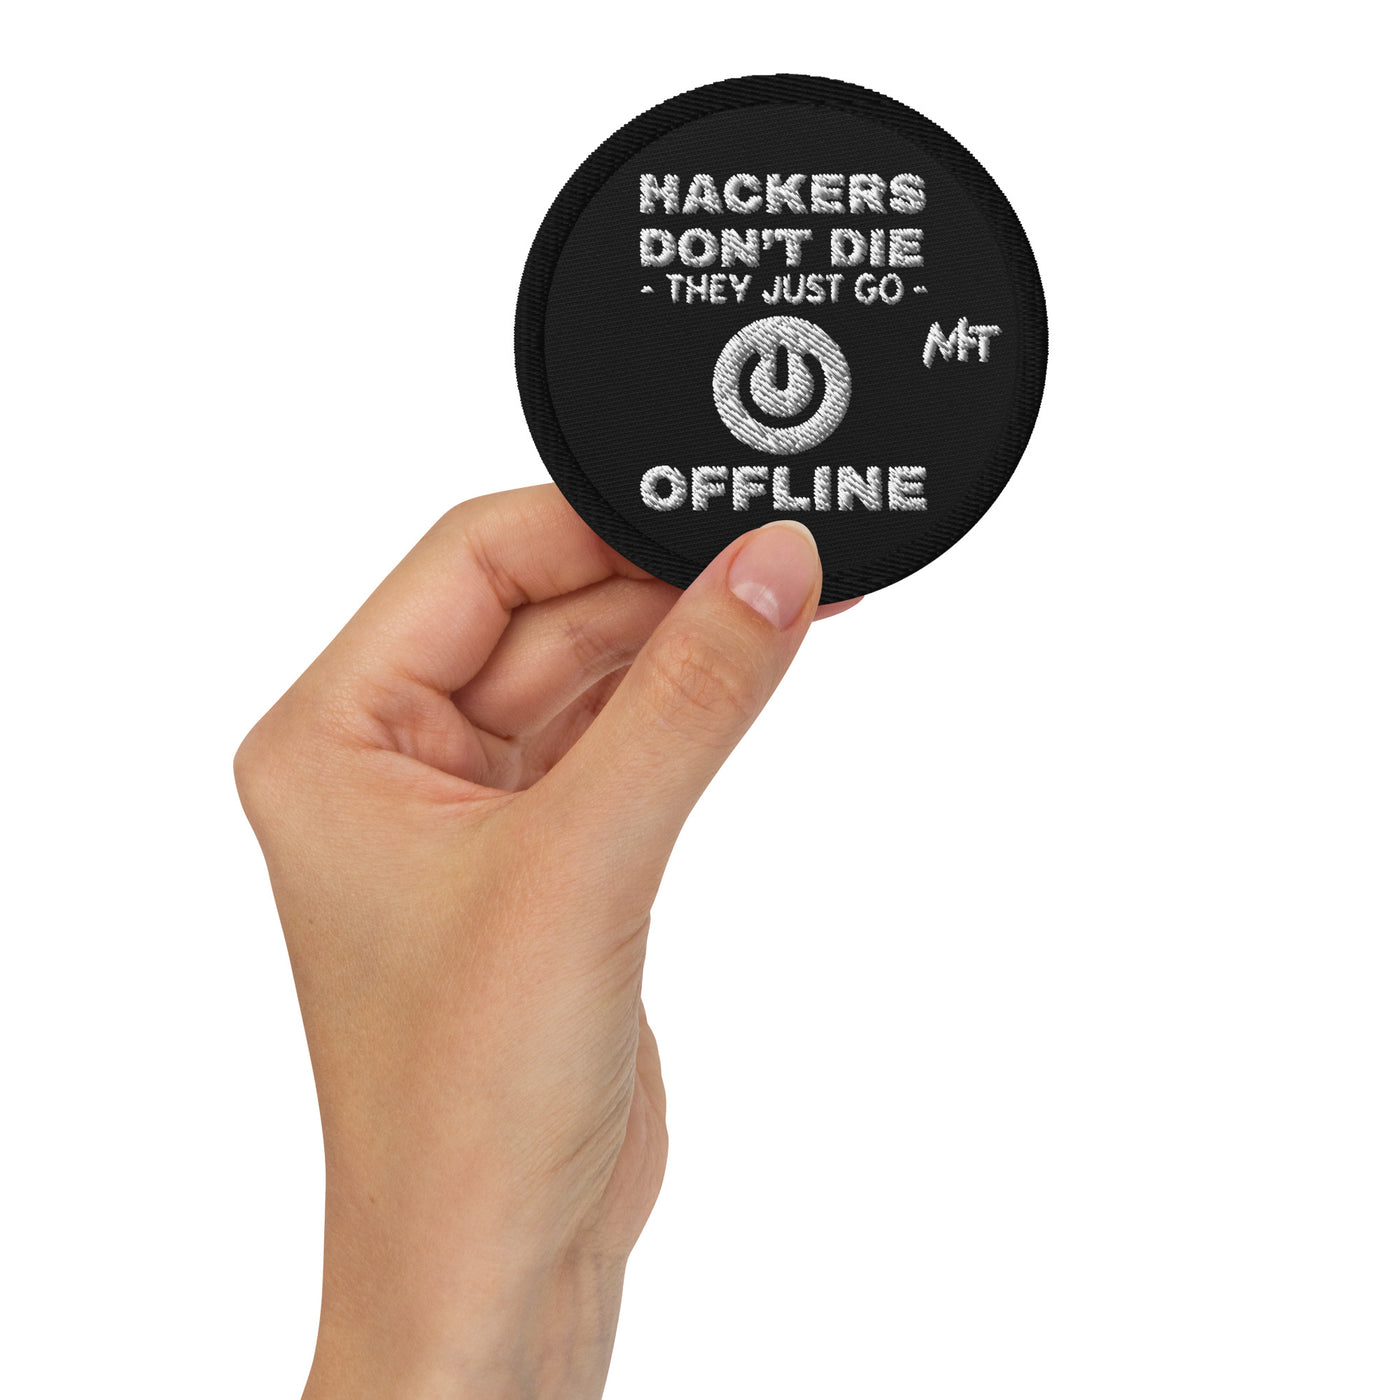 Hackers don’t die they just go offline - Embroidered patches